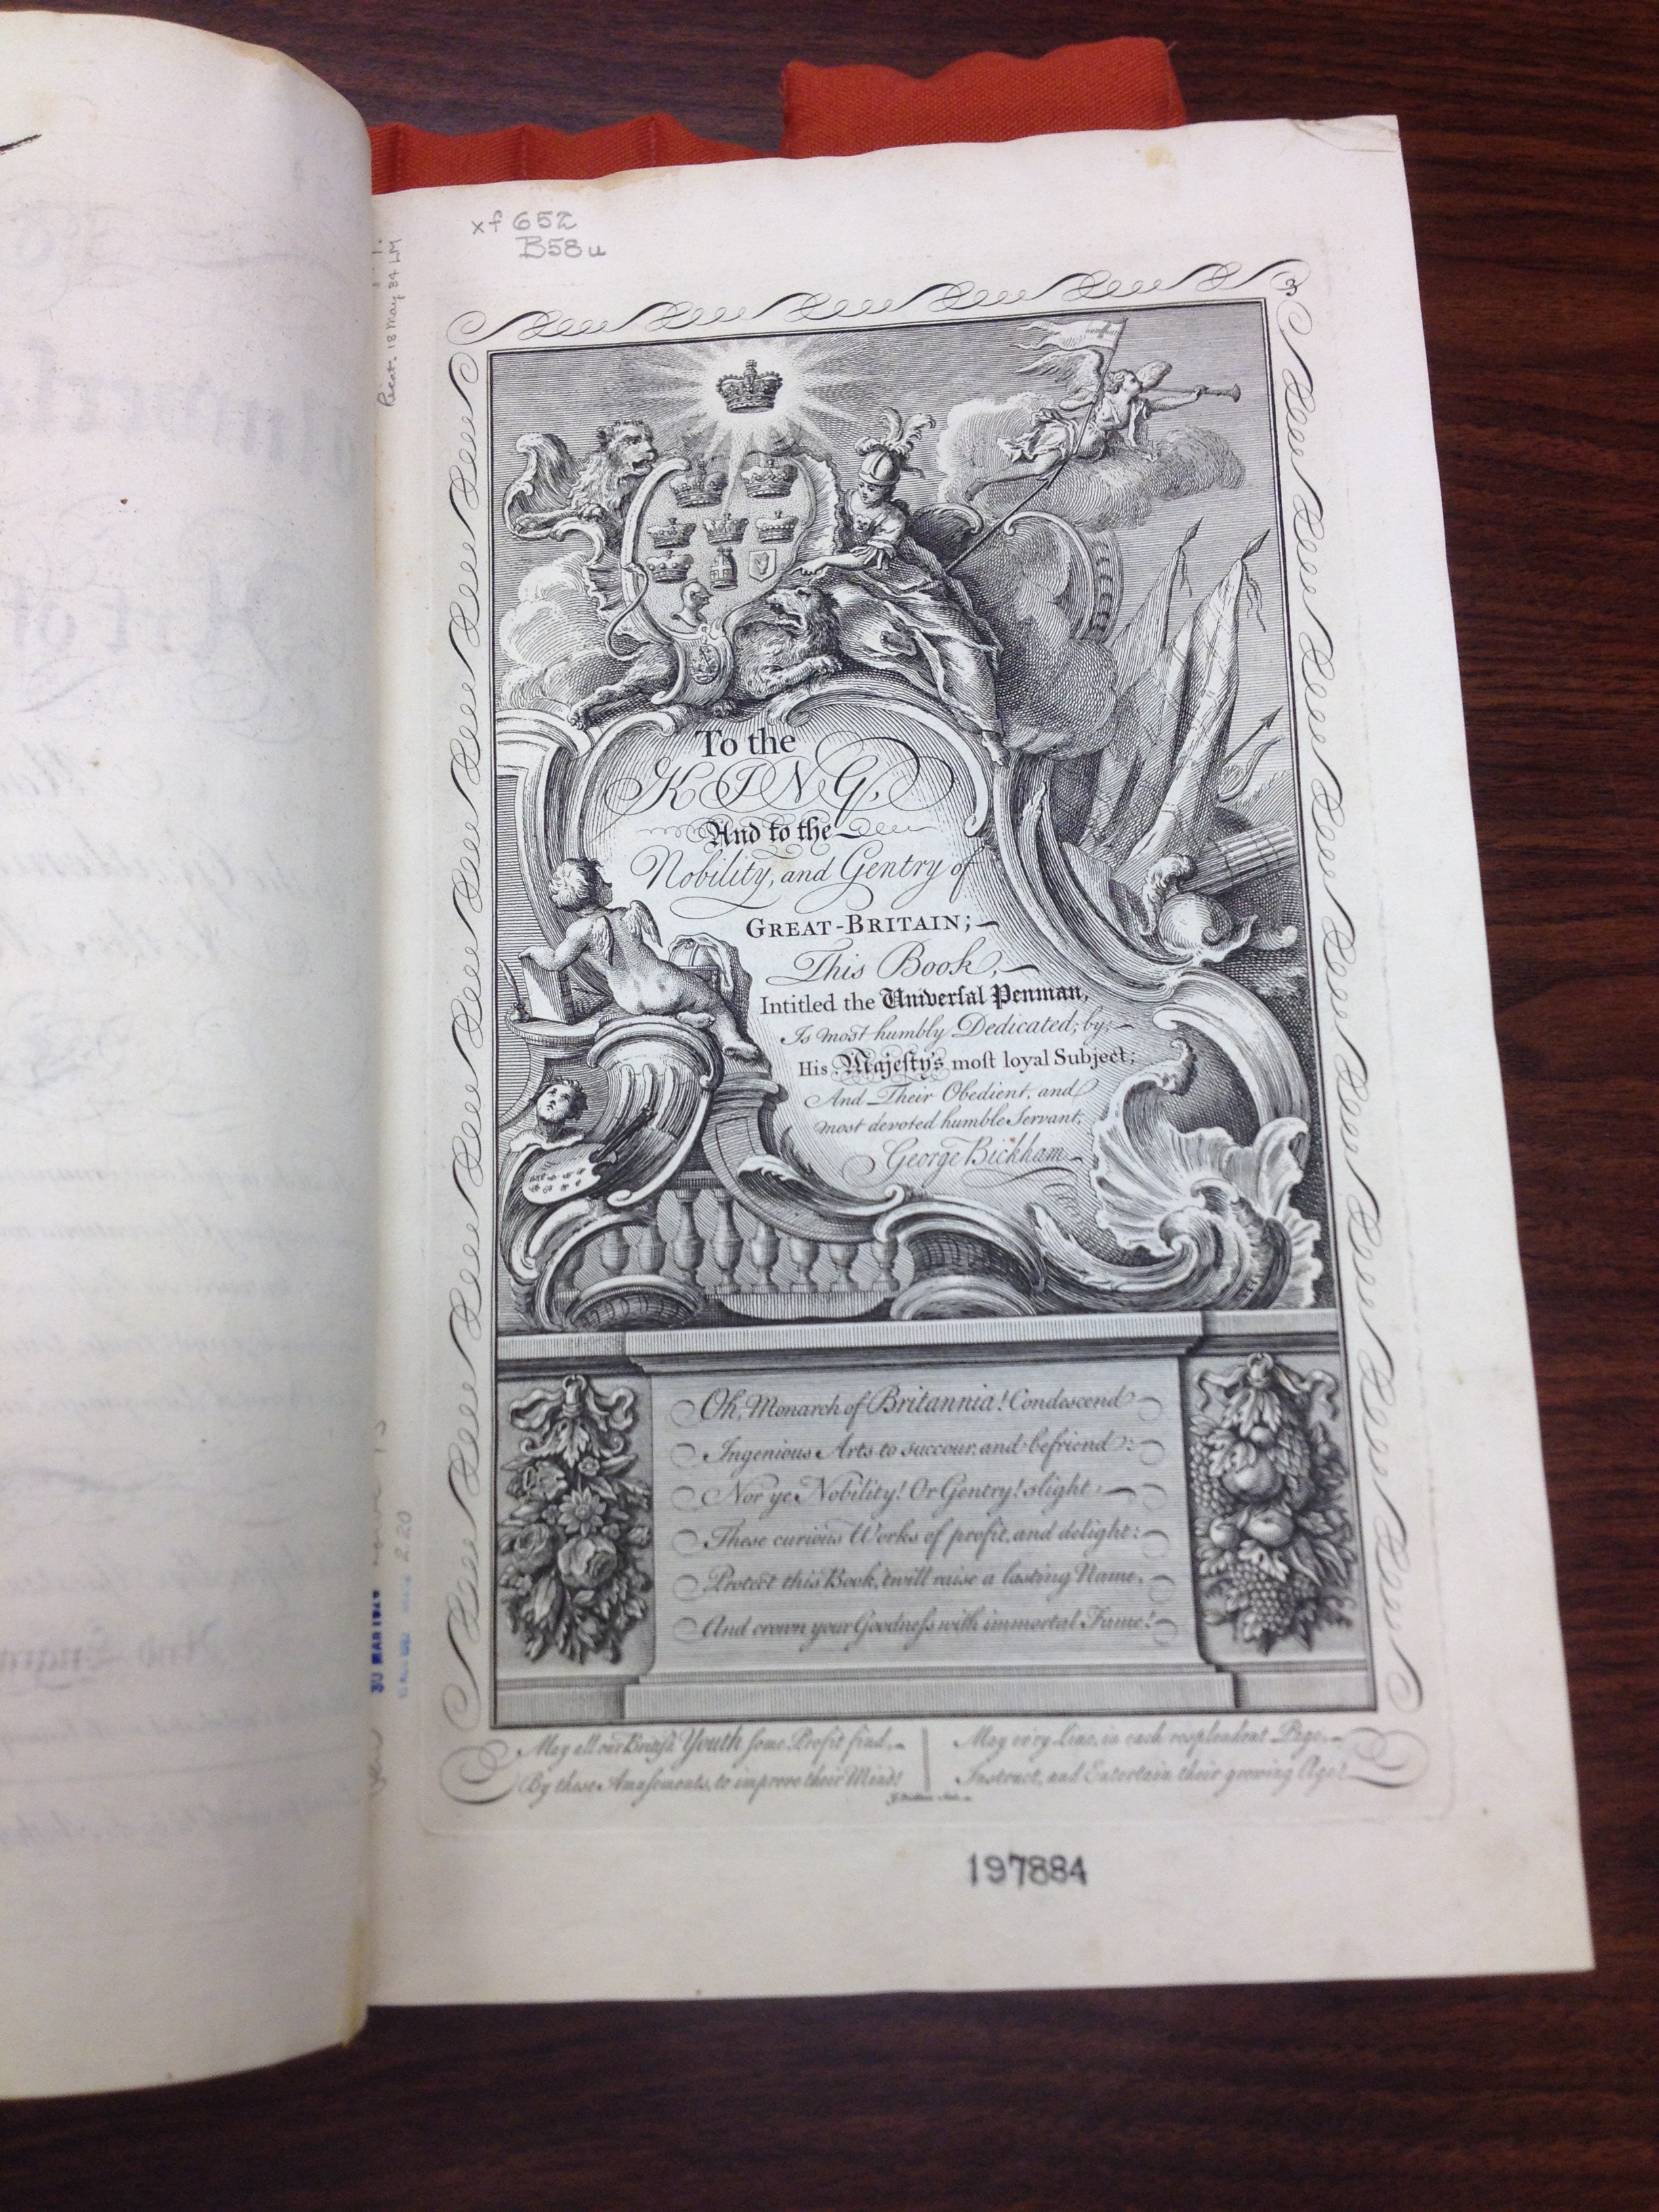 The Universal Penman by George Bickham at the University of Iowa's Special Collections Reading Room